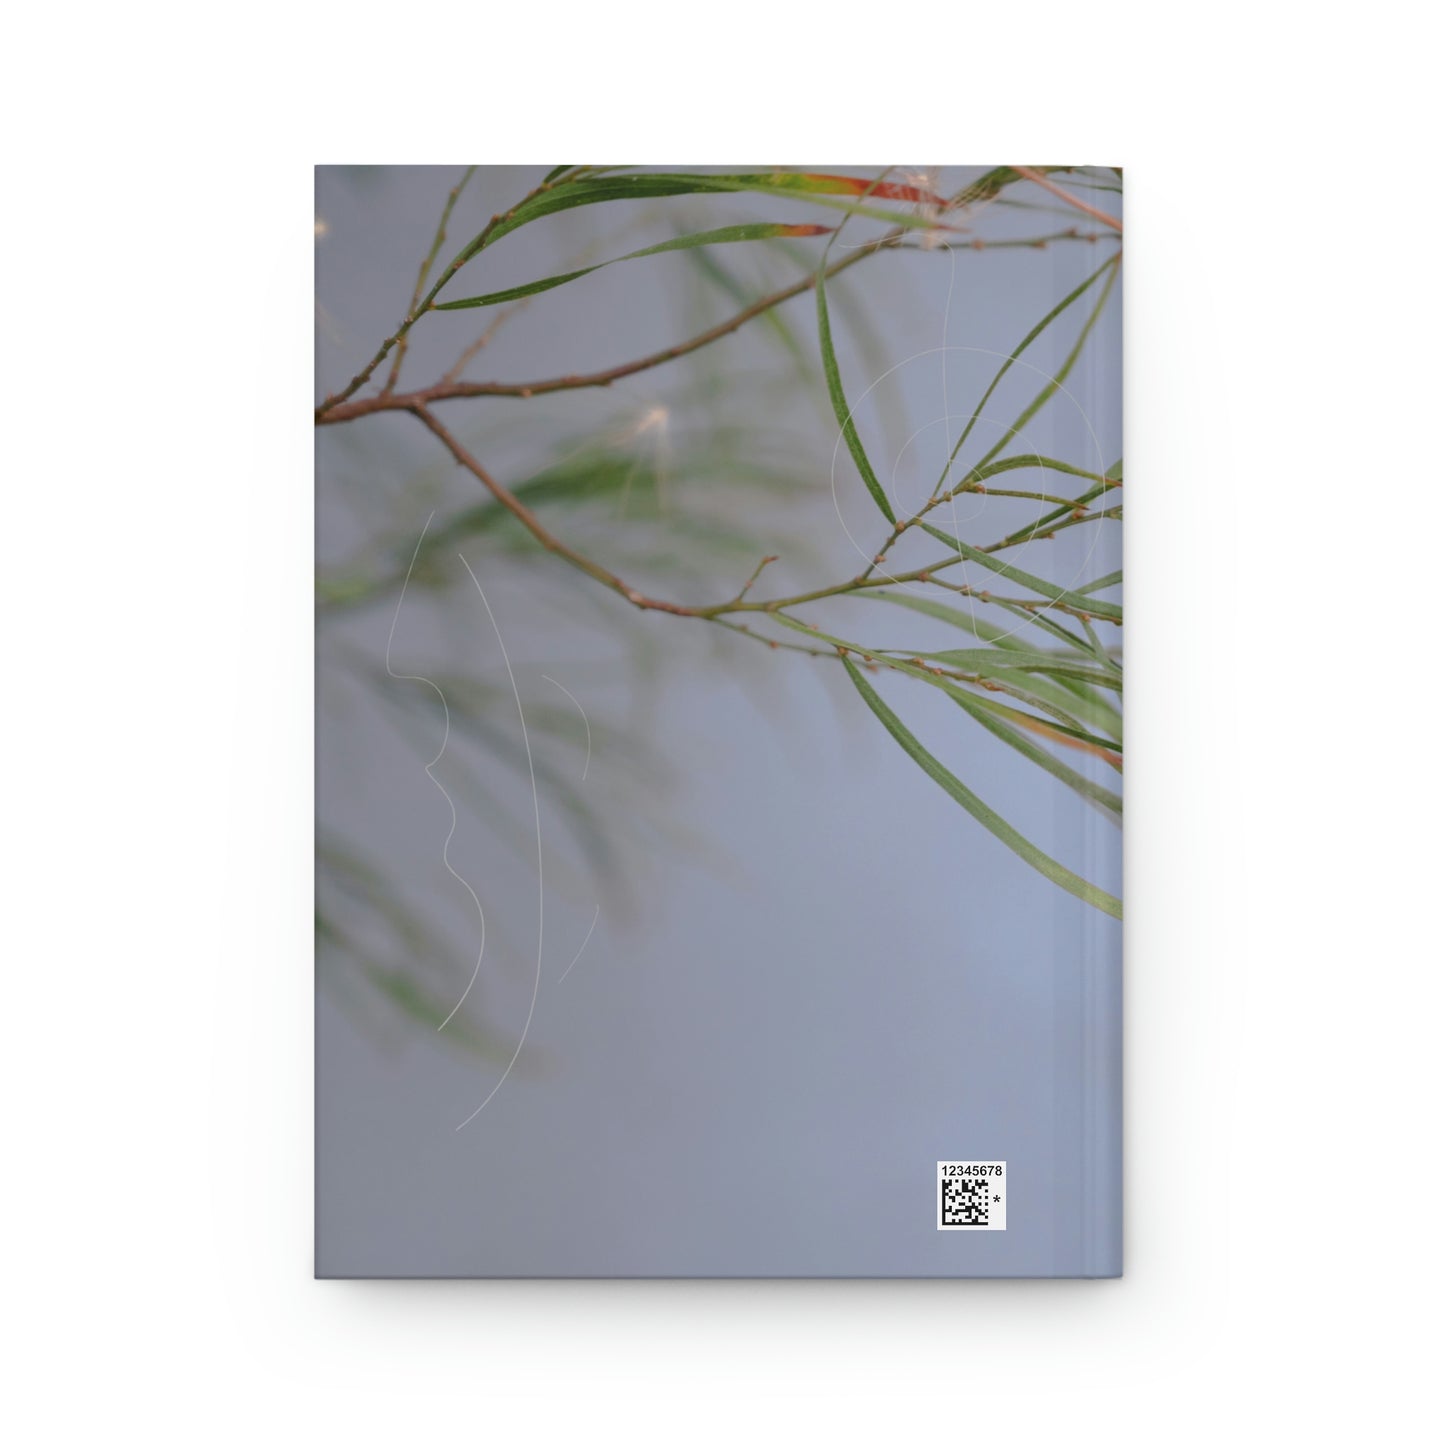 Buds against the wall hardcover journal diary notebook gift ideas